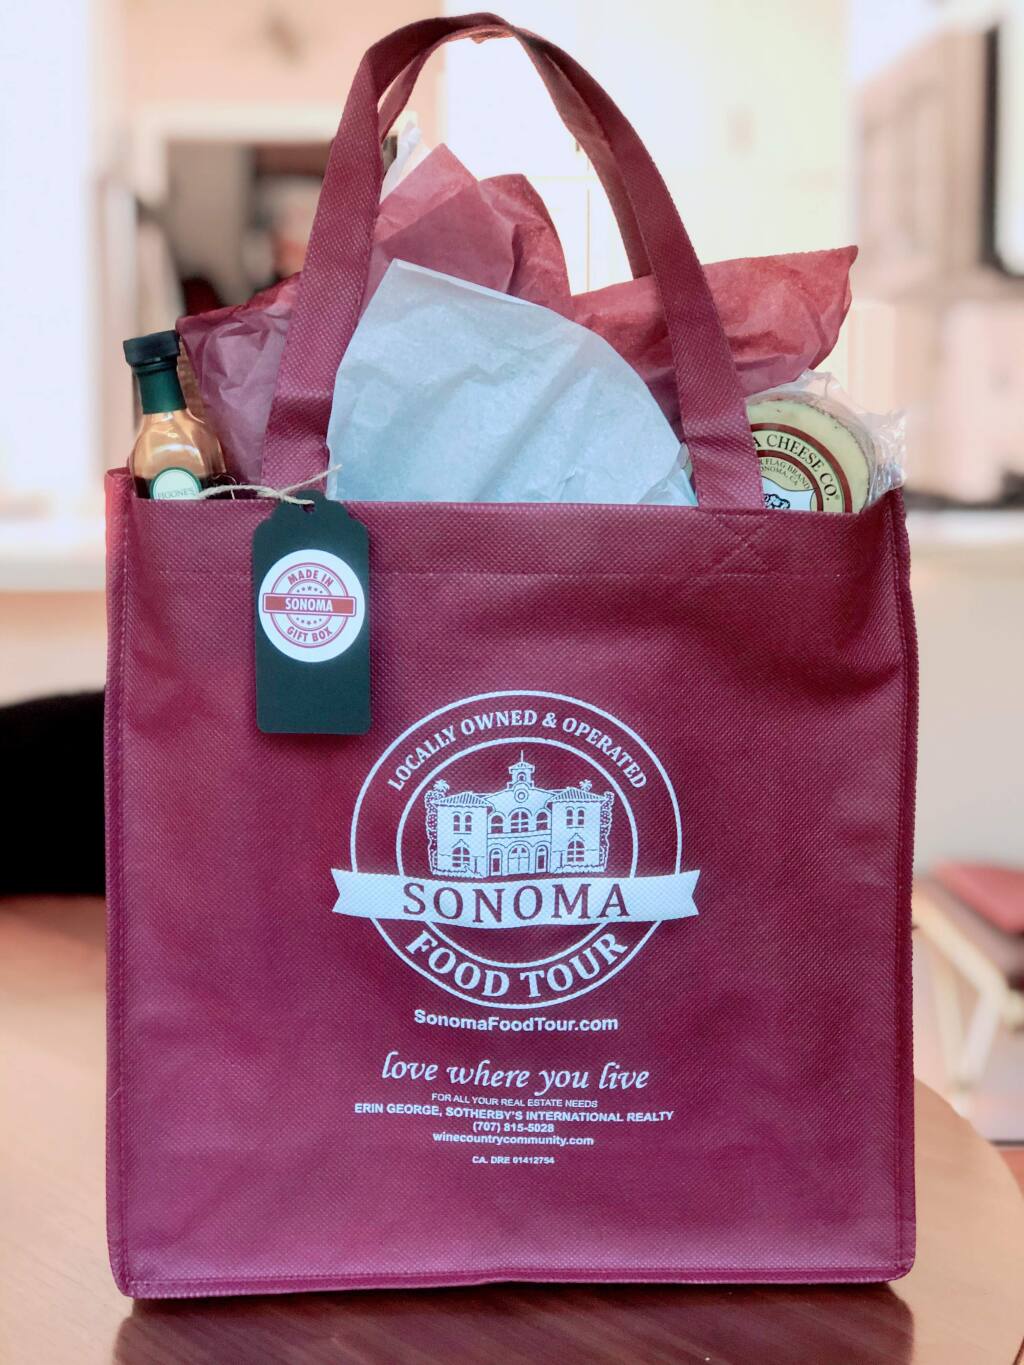 A Made-in-Sonoma gift bag.